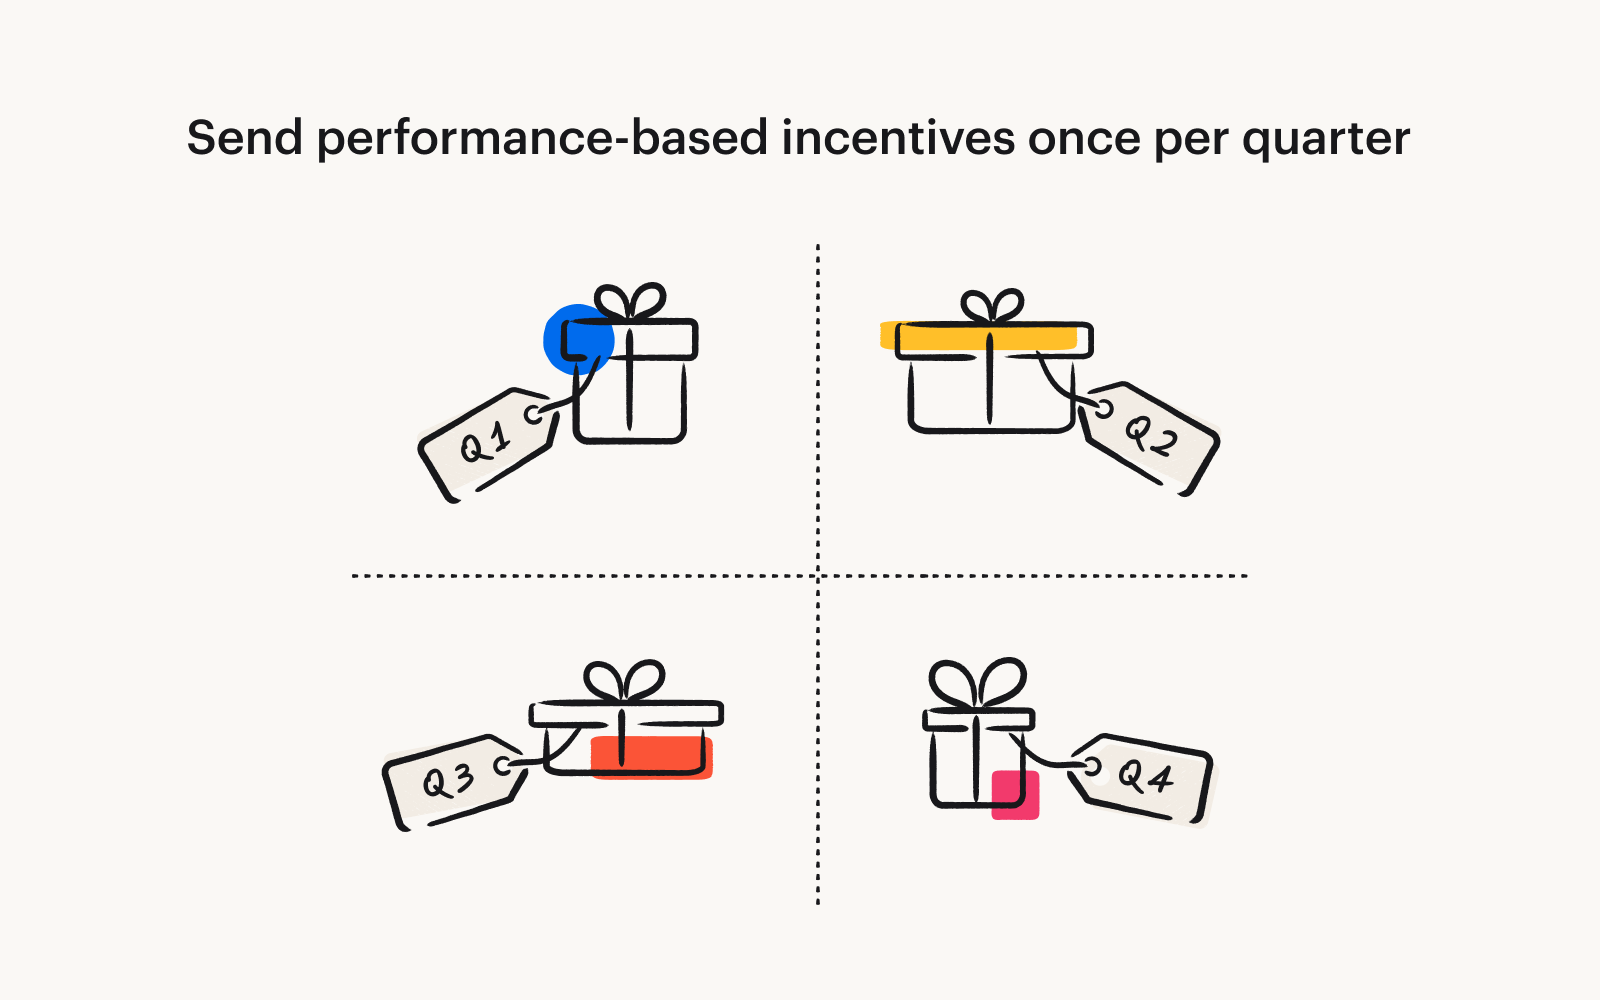 Text reads: "Send performance-based incentives once per quarter." Then, there are four quadrants, each with an incentive inside.